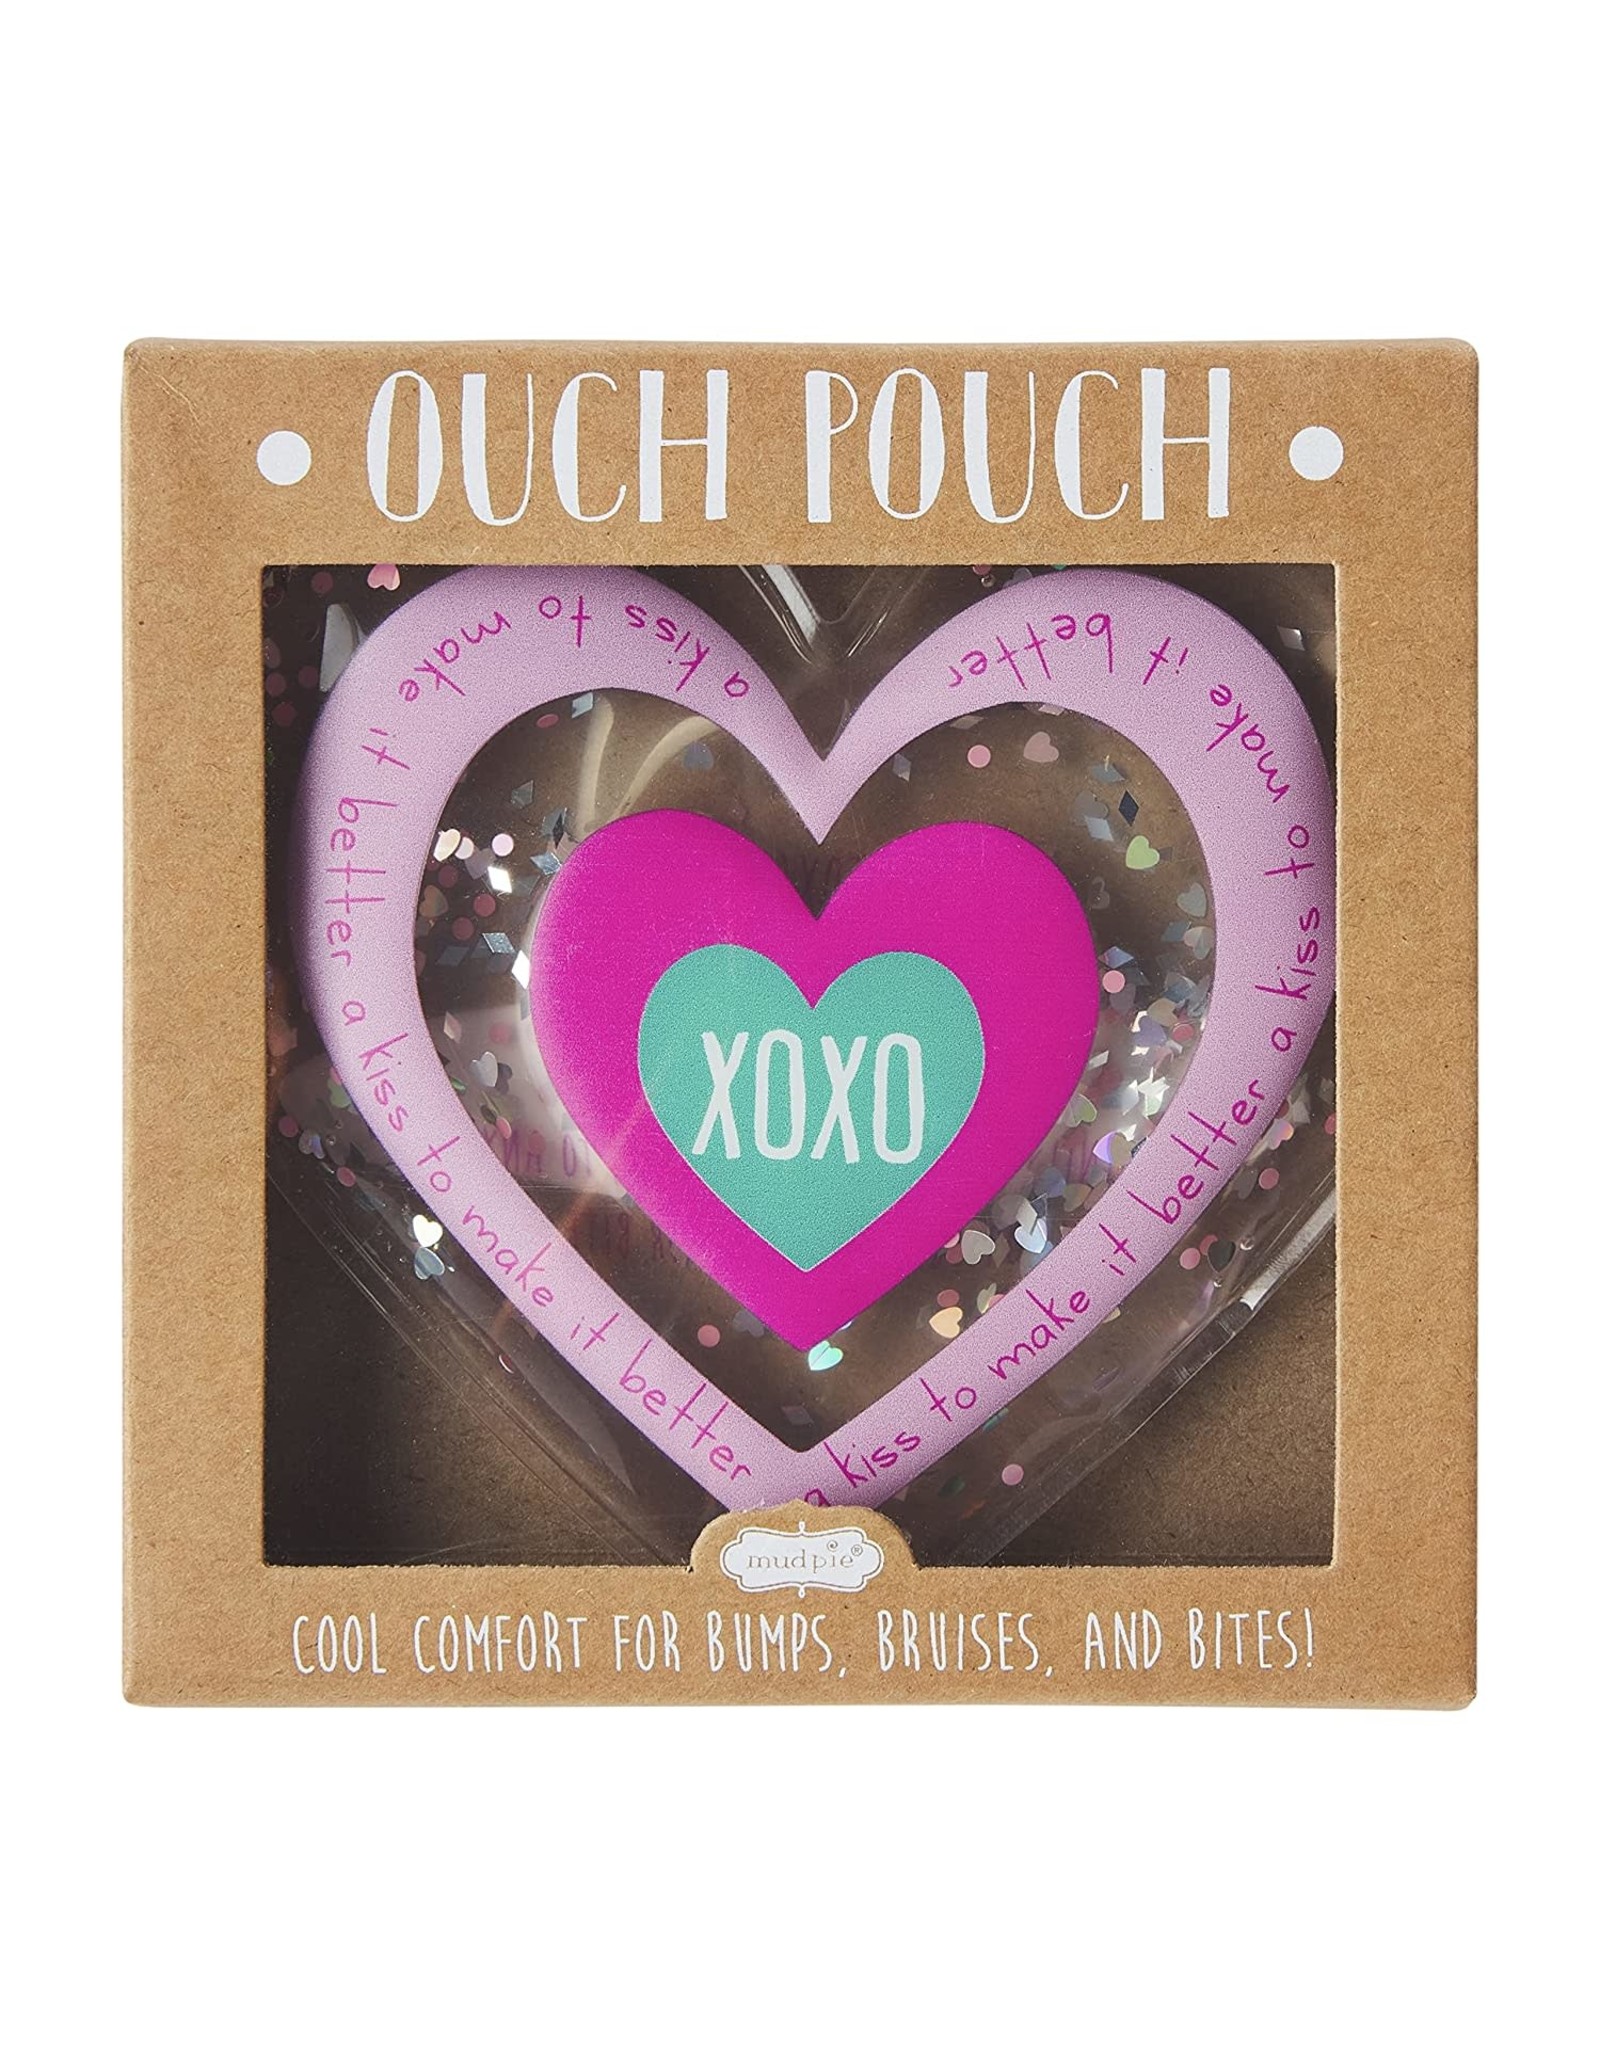 Mud Pie Heart Ouch Pouch Cool Comfort For Bumps Bruises And Bites